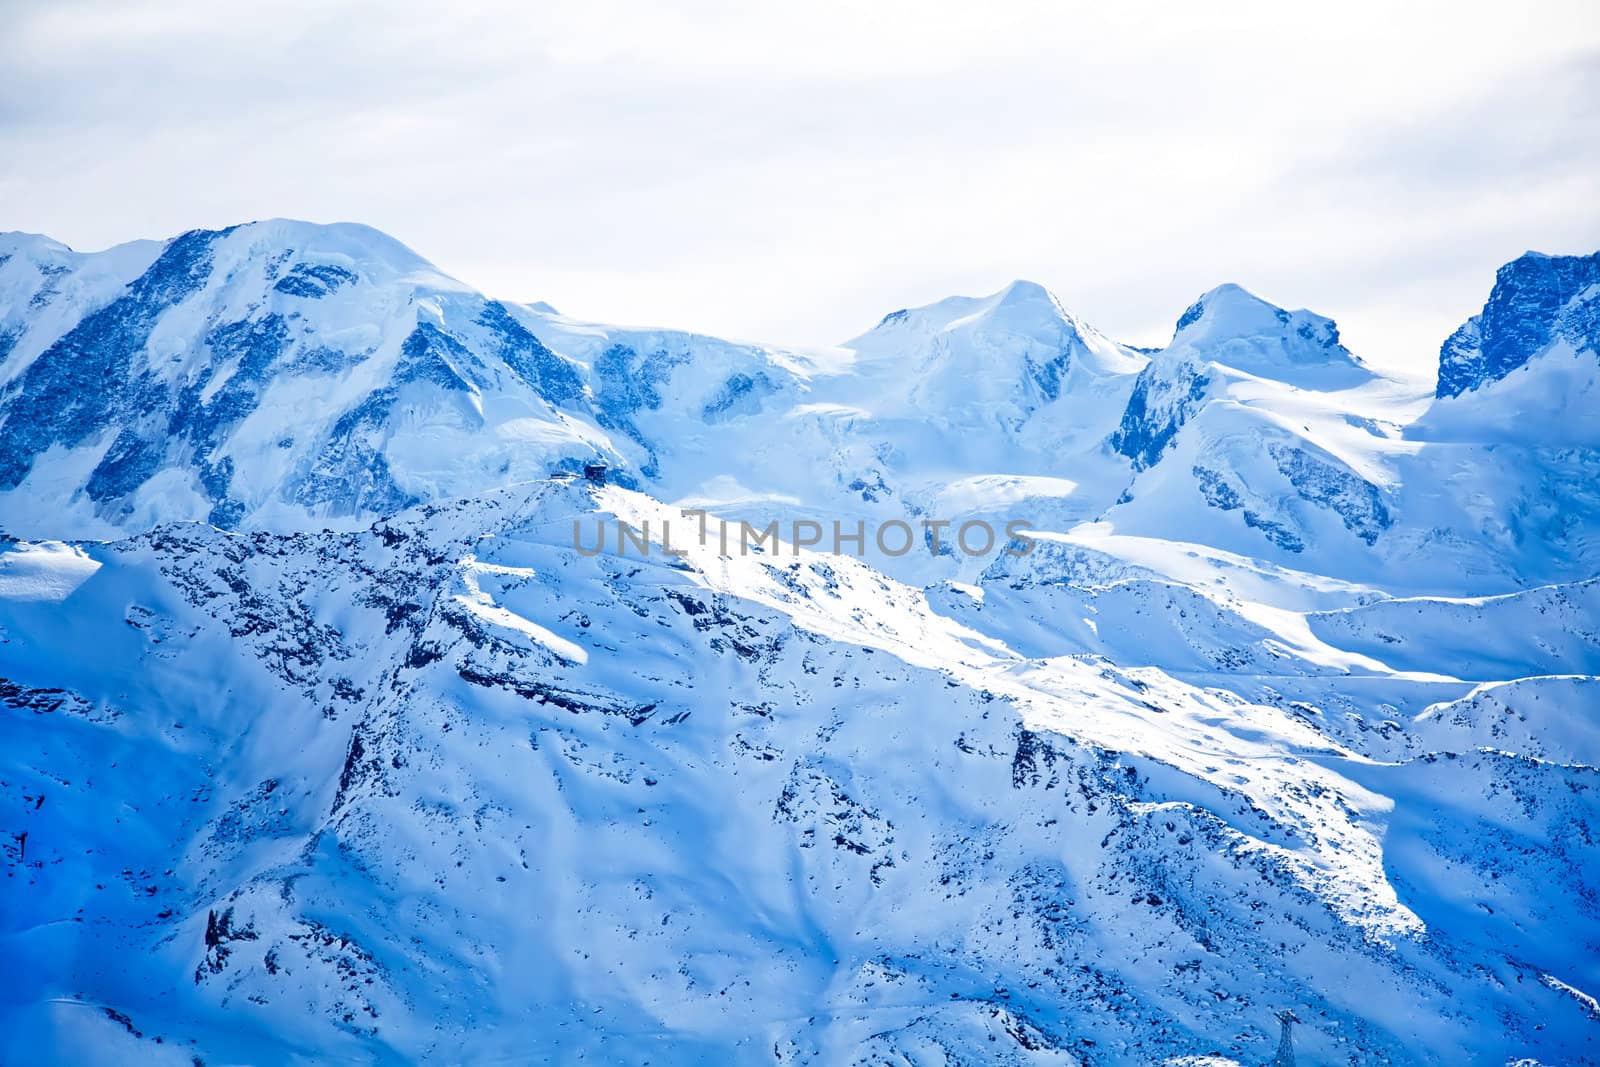 Swiss alps landscape with blue snow